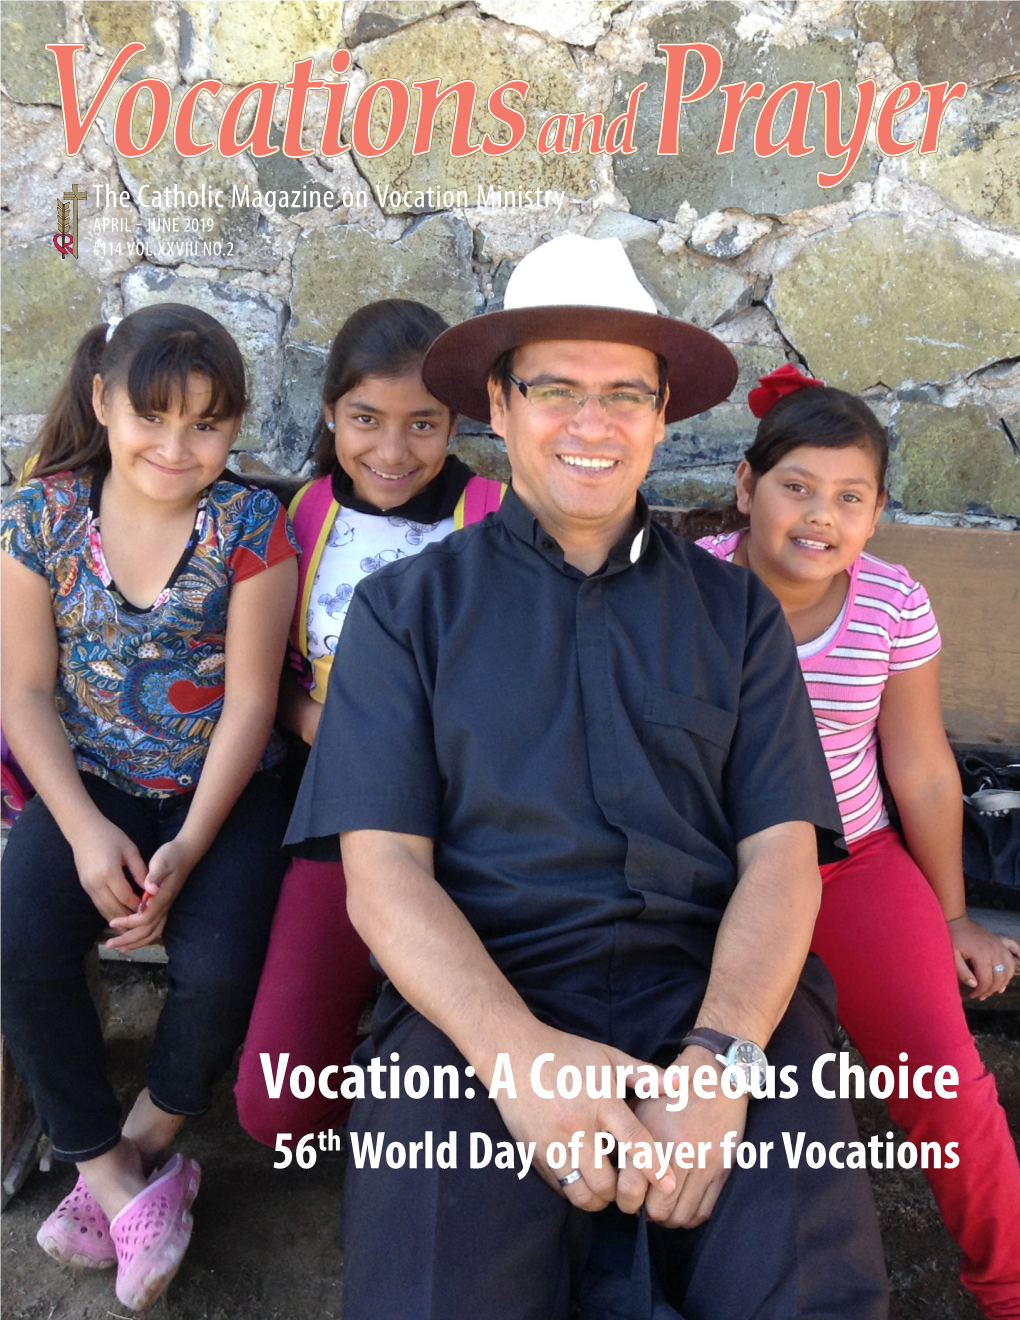 A Courageous Choice 56Th World Day of Prayer for Vocations in This Issue April - June 2019 Vol